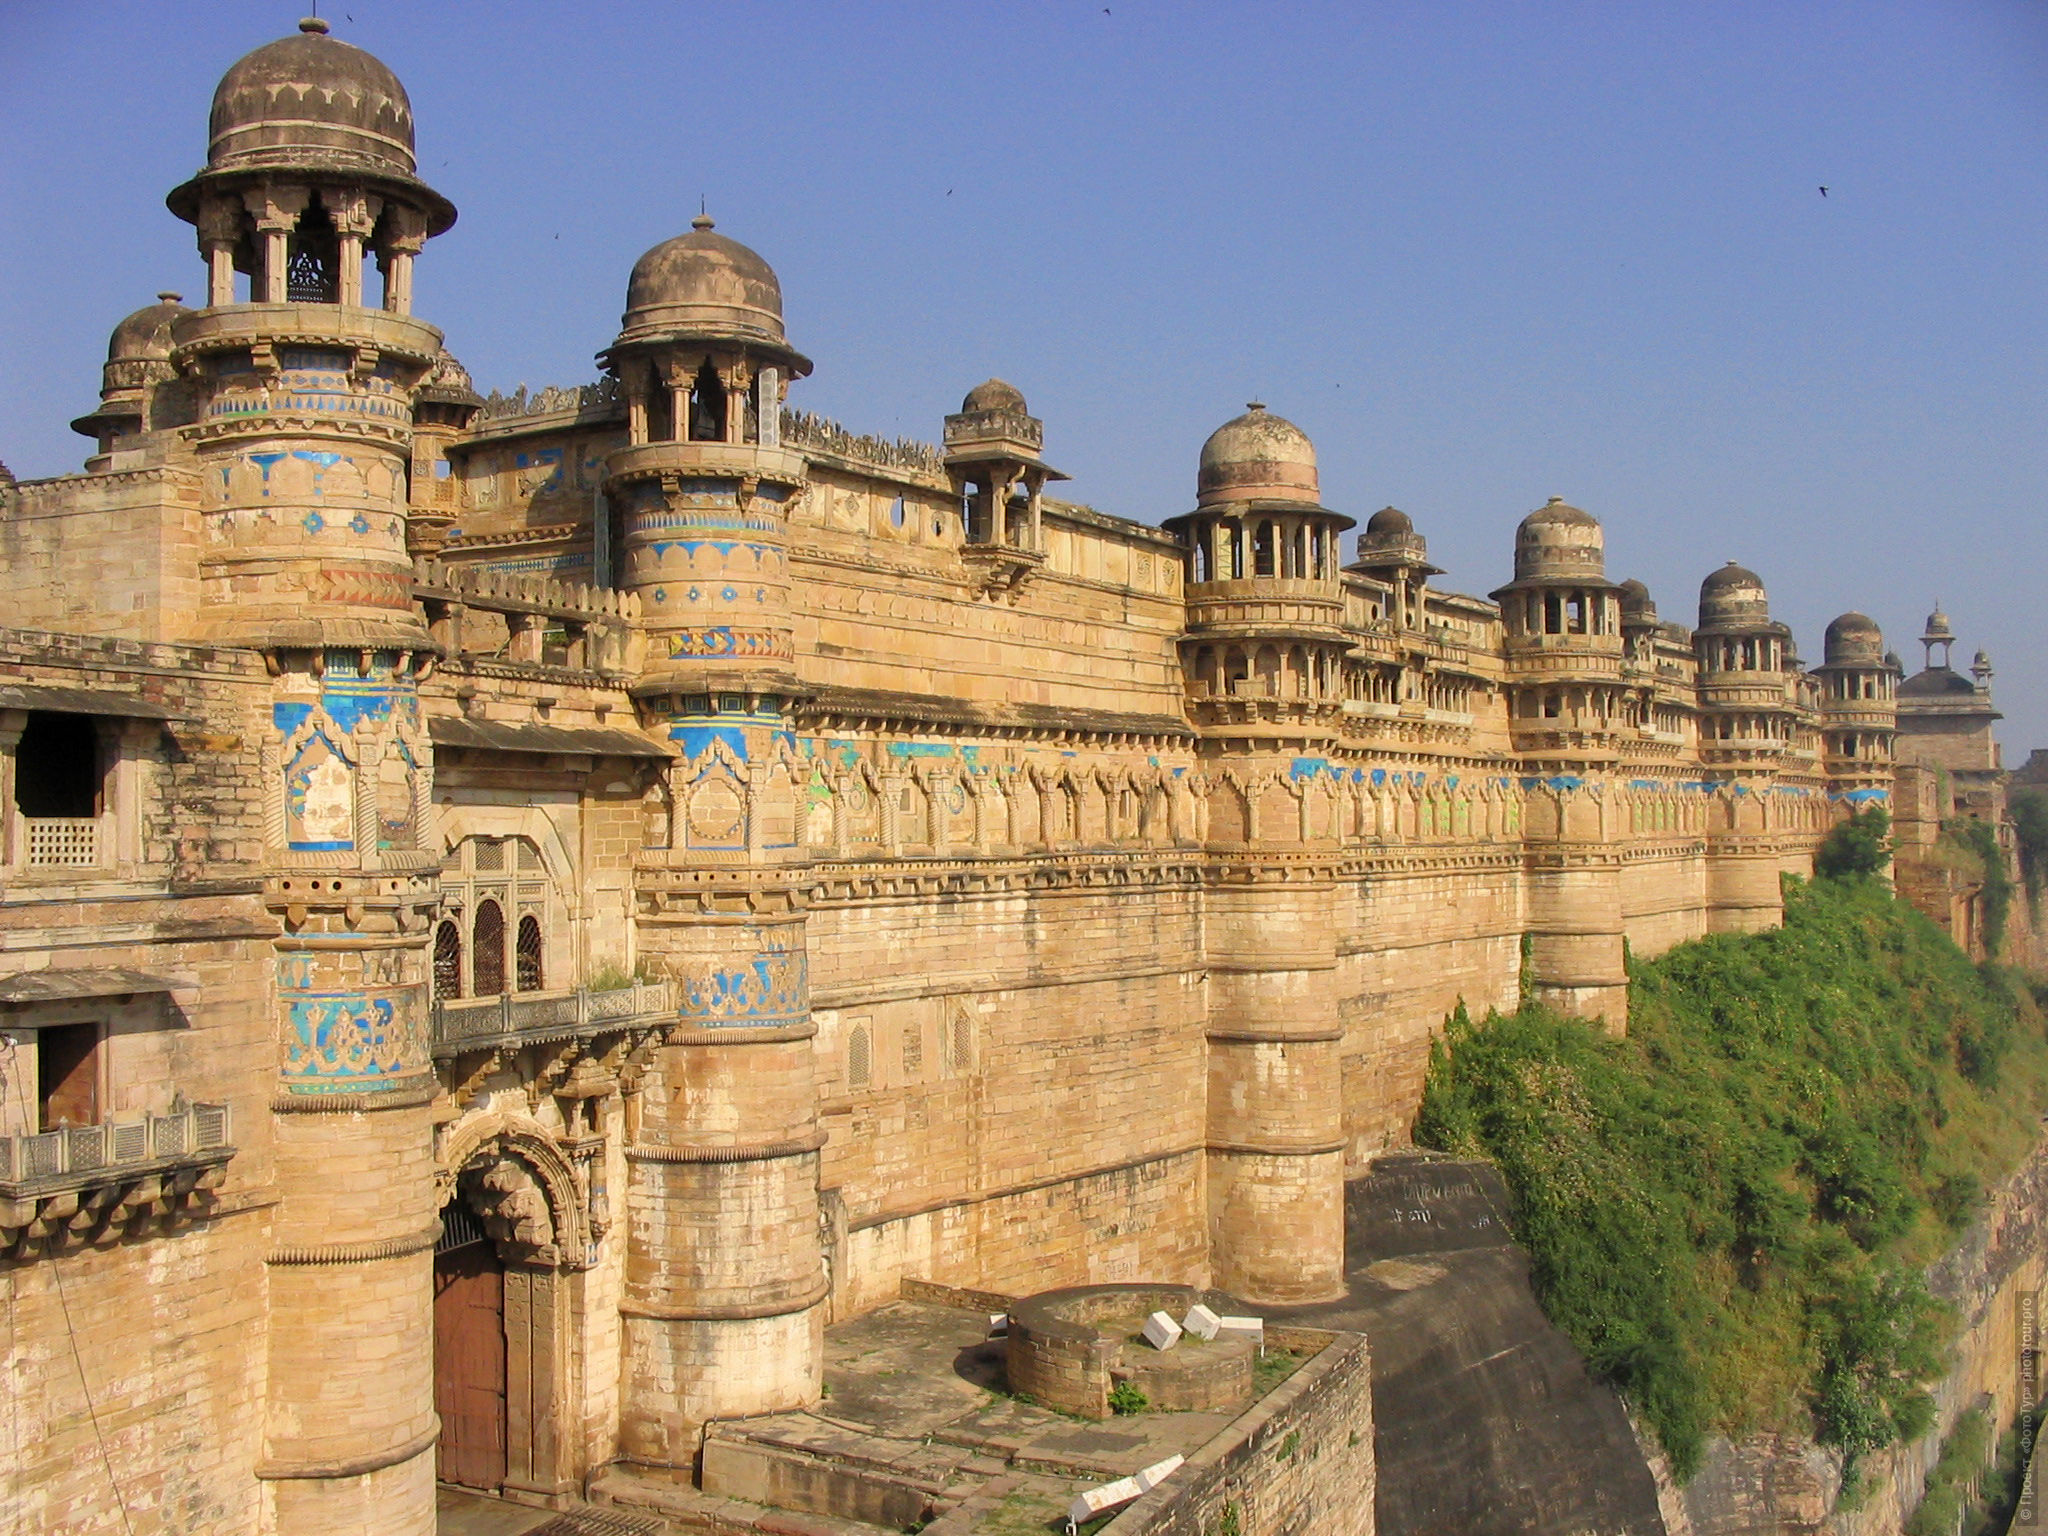 Fort Gwalior, India. Tour to Gwalior, September 2019.